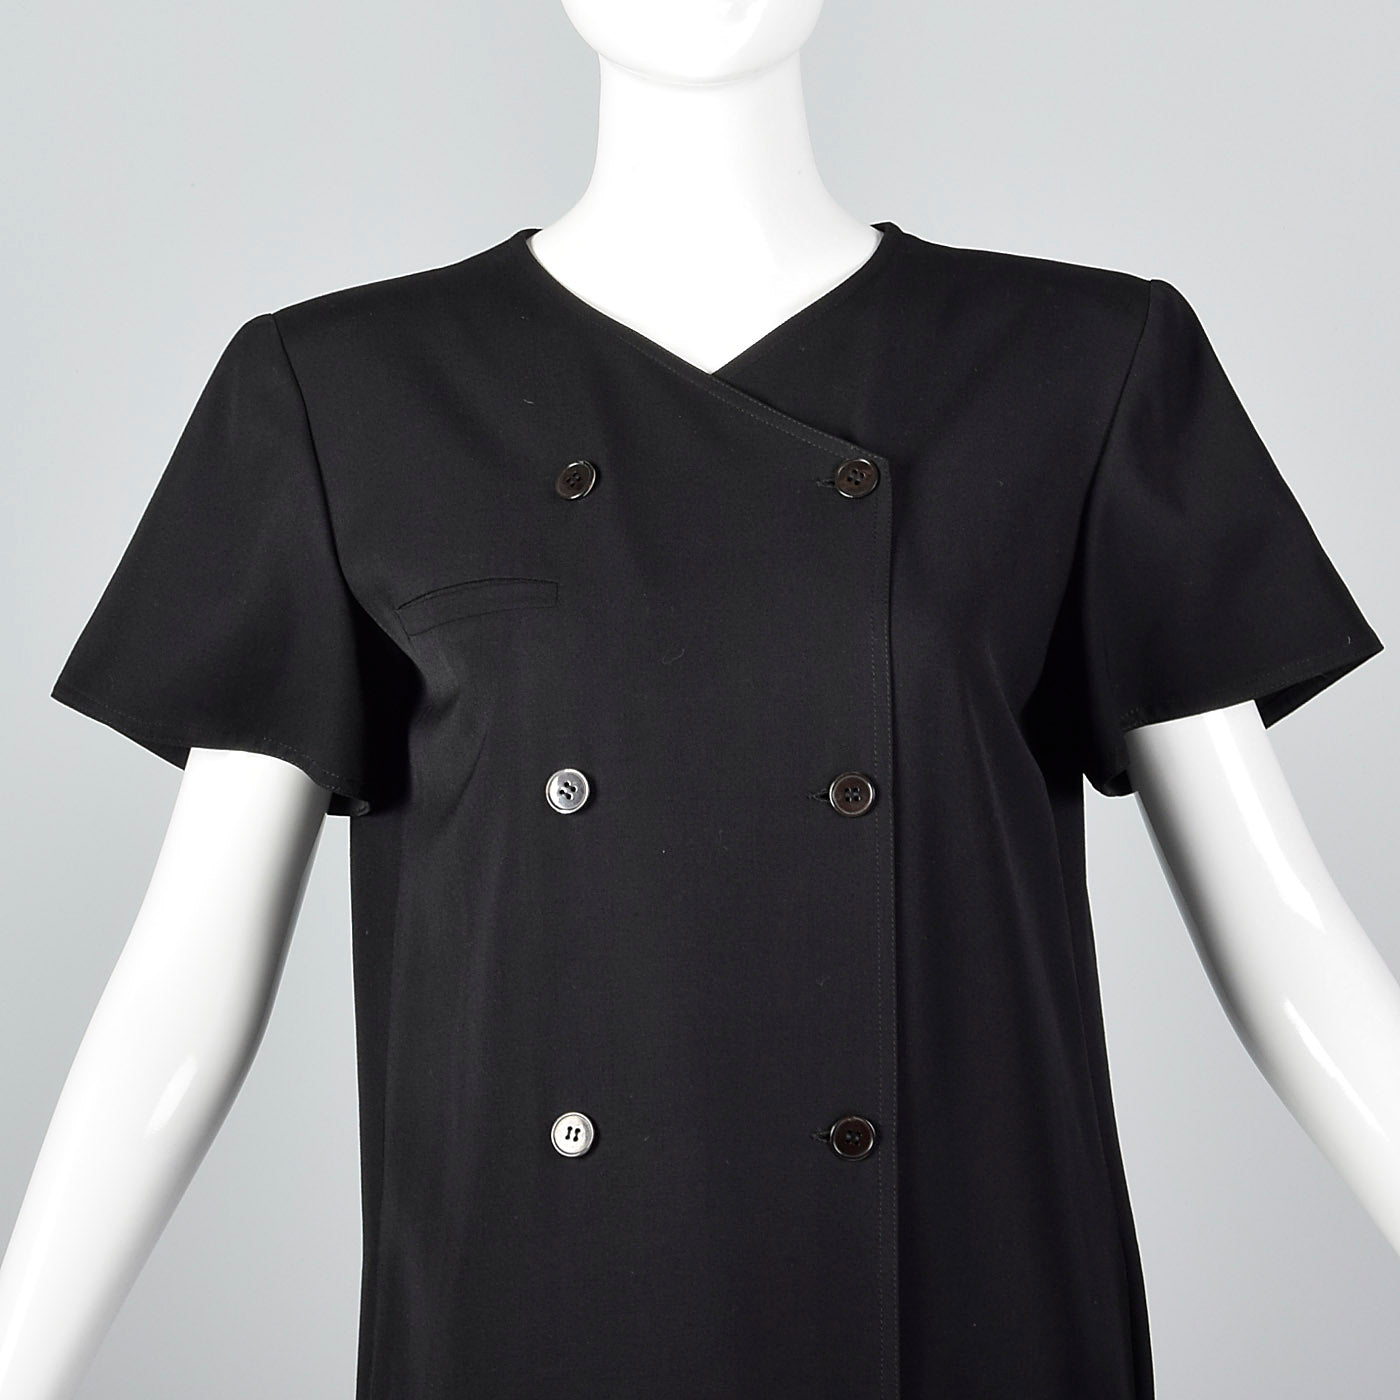 1990s Valentino Black Wool Sack Dress with a Pleated Back